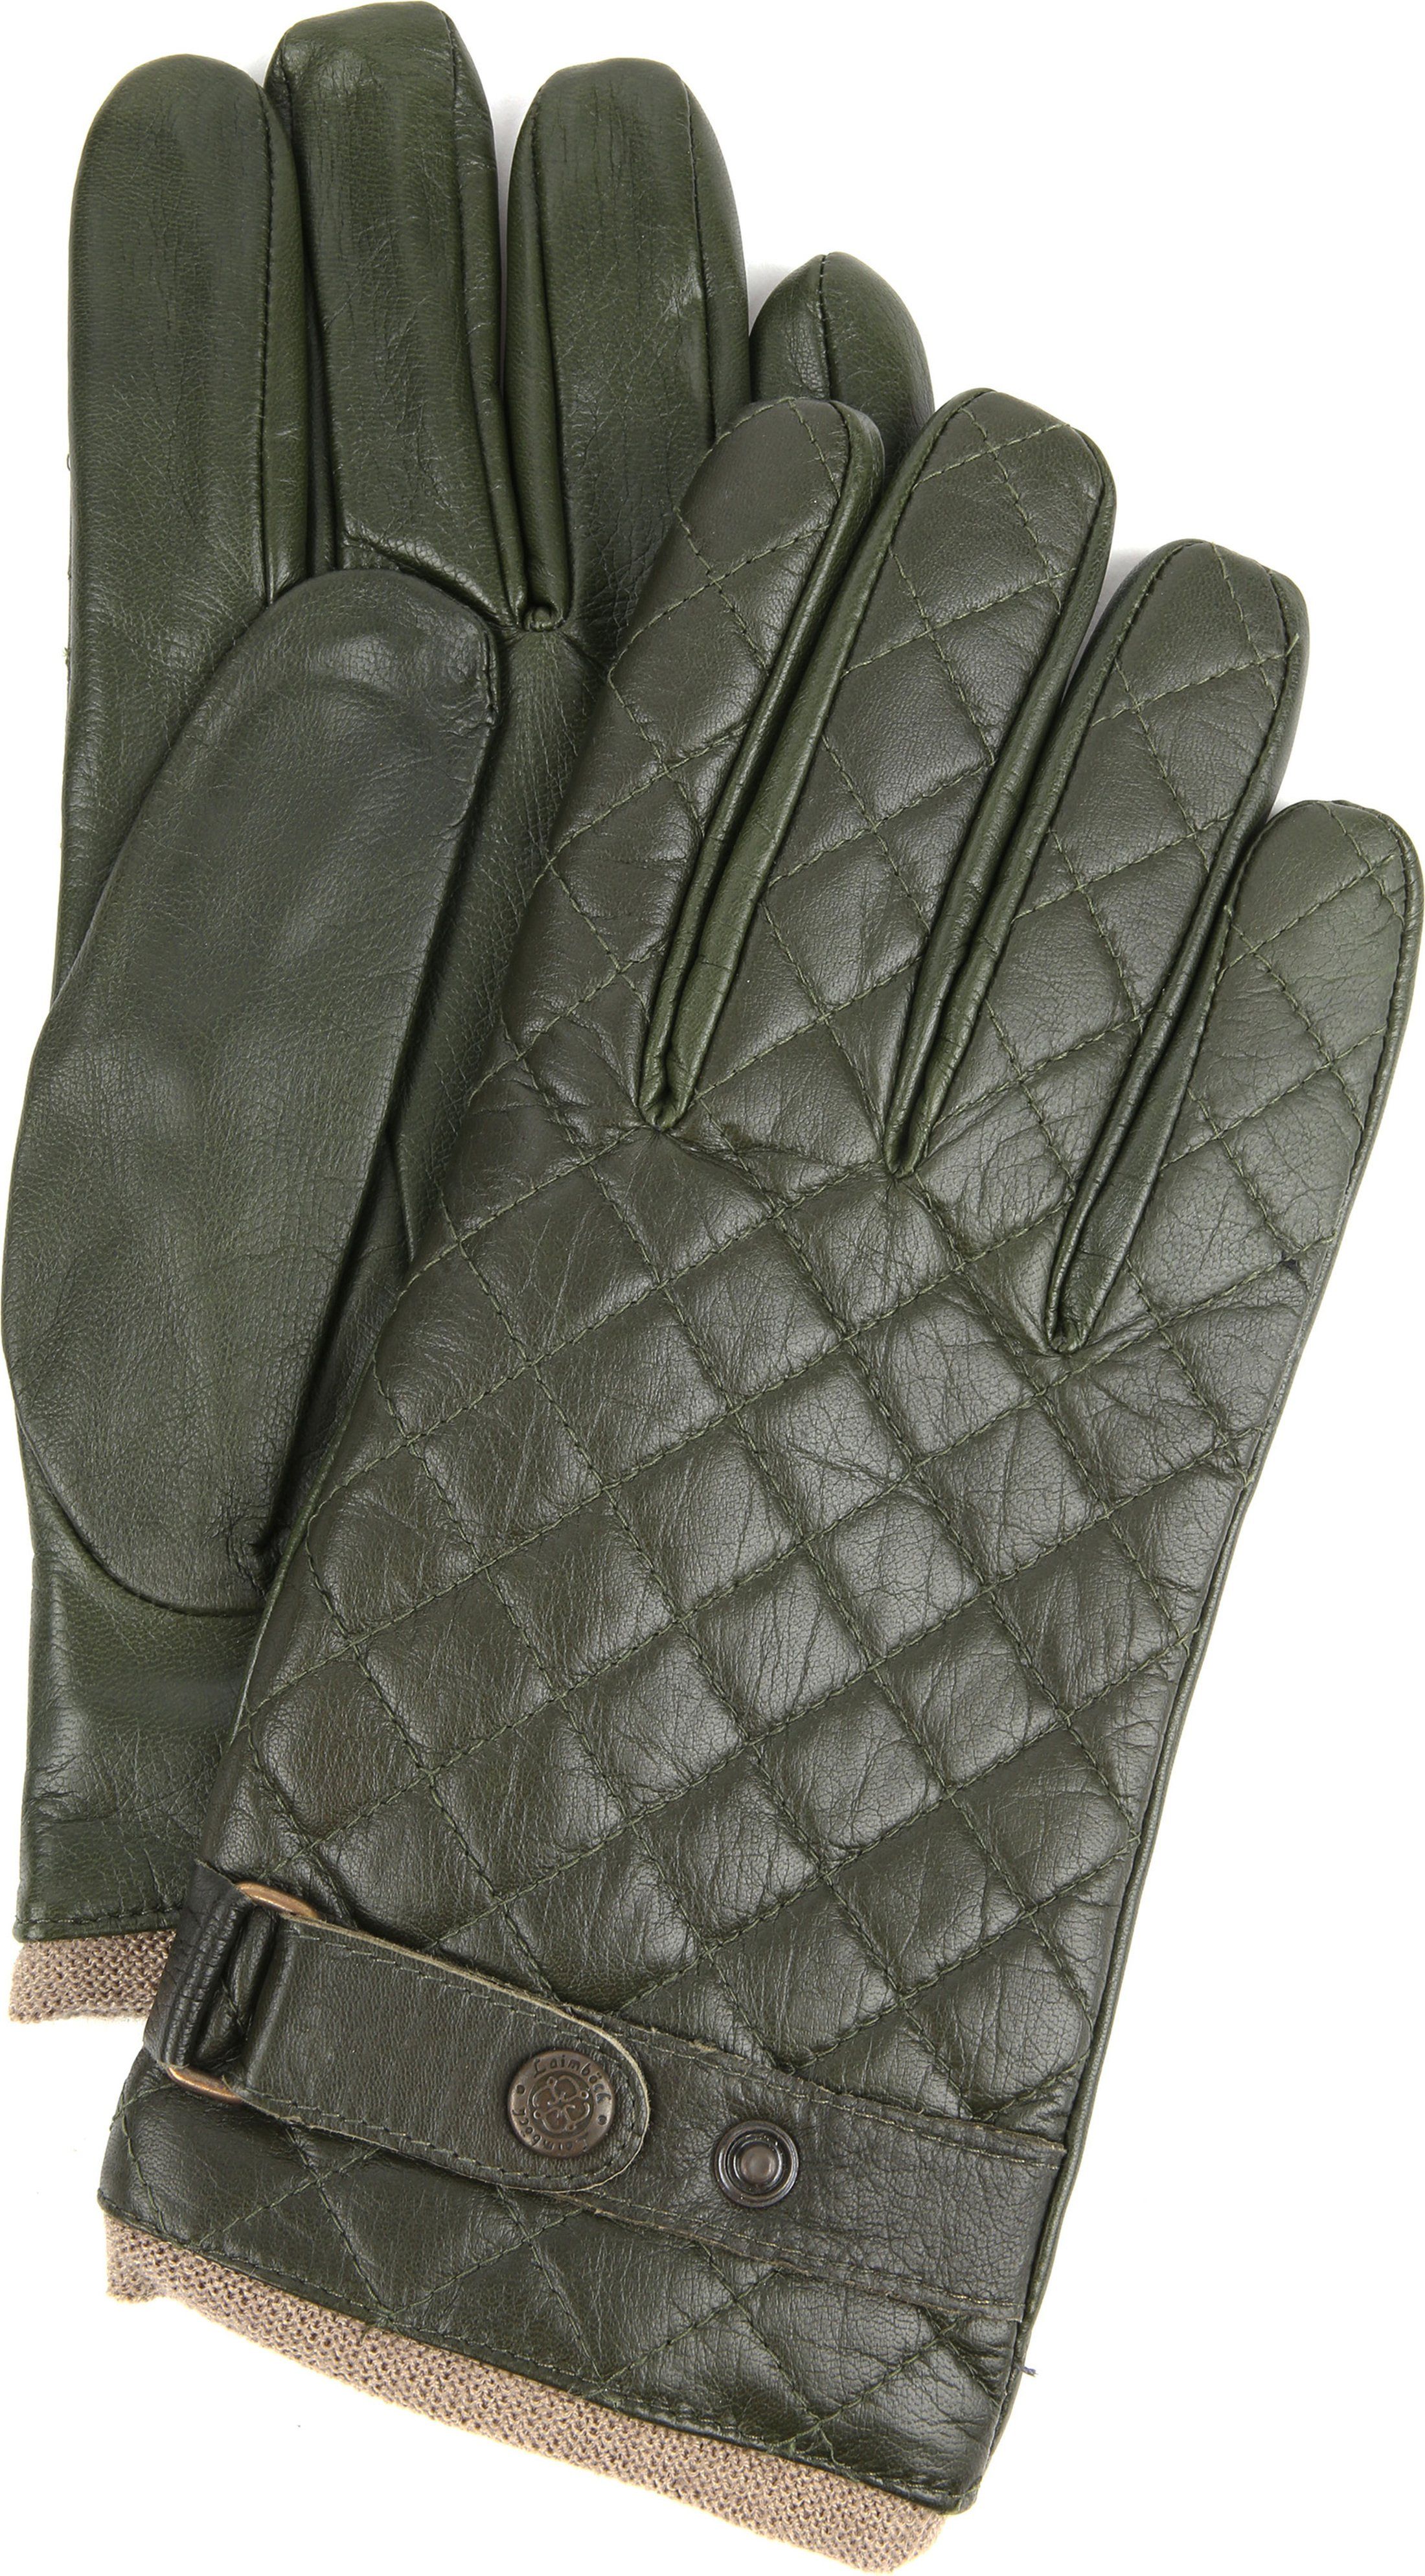 Laimbock Quilted Gloves Blacos Olive Dark Green Green size 10